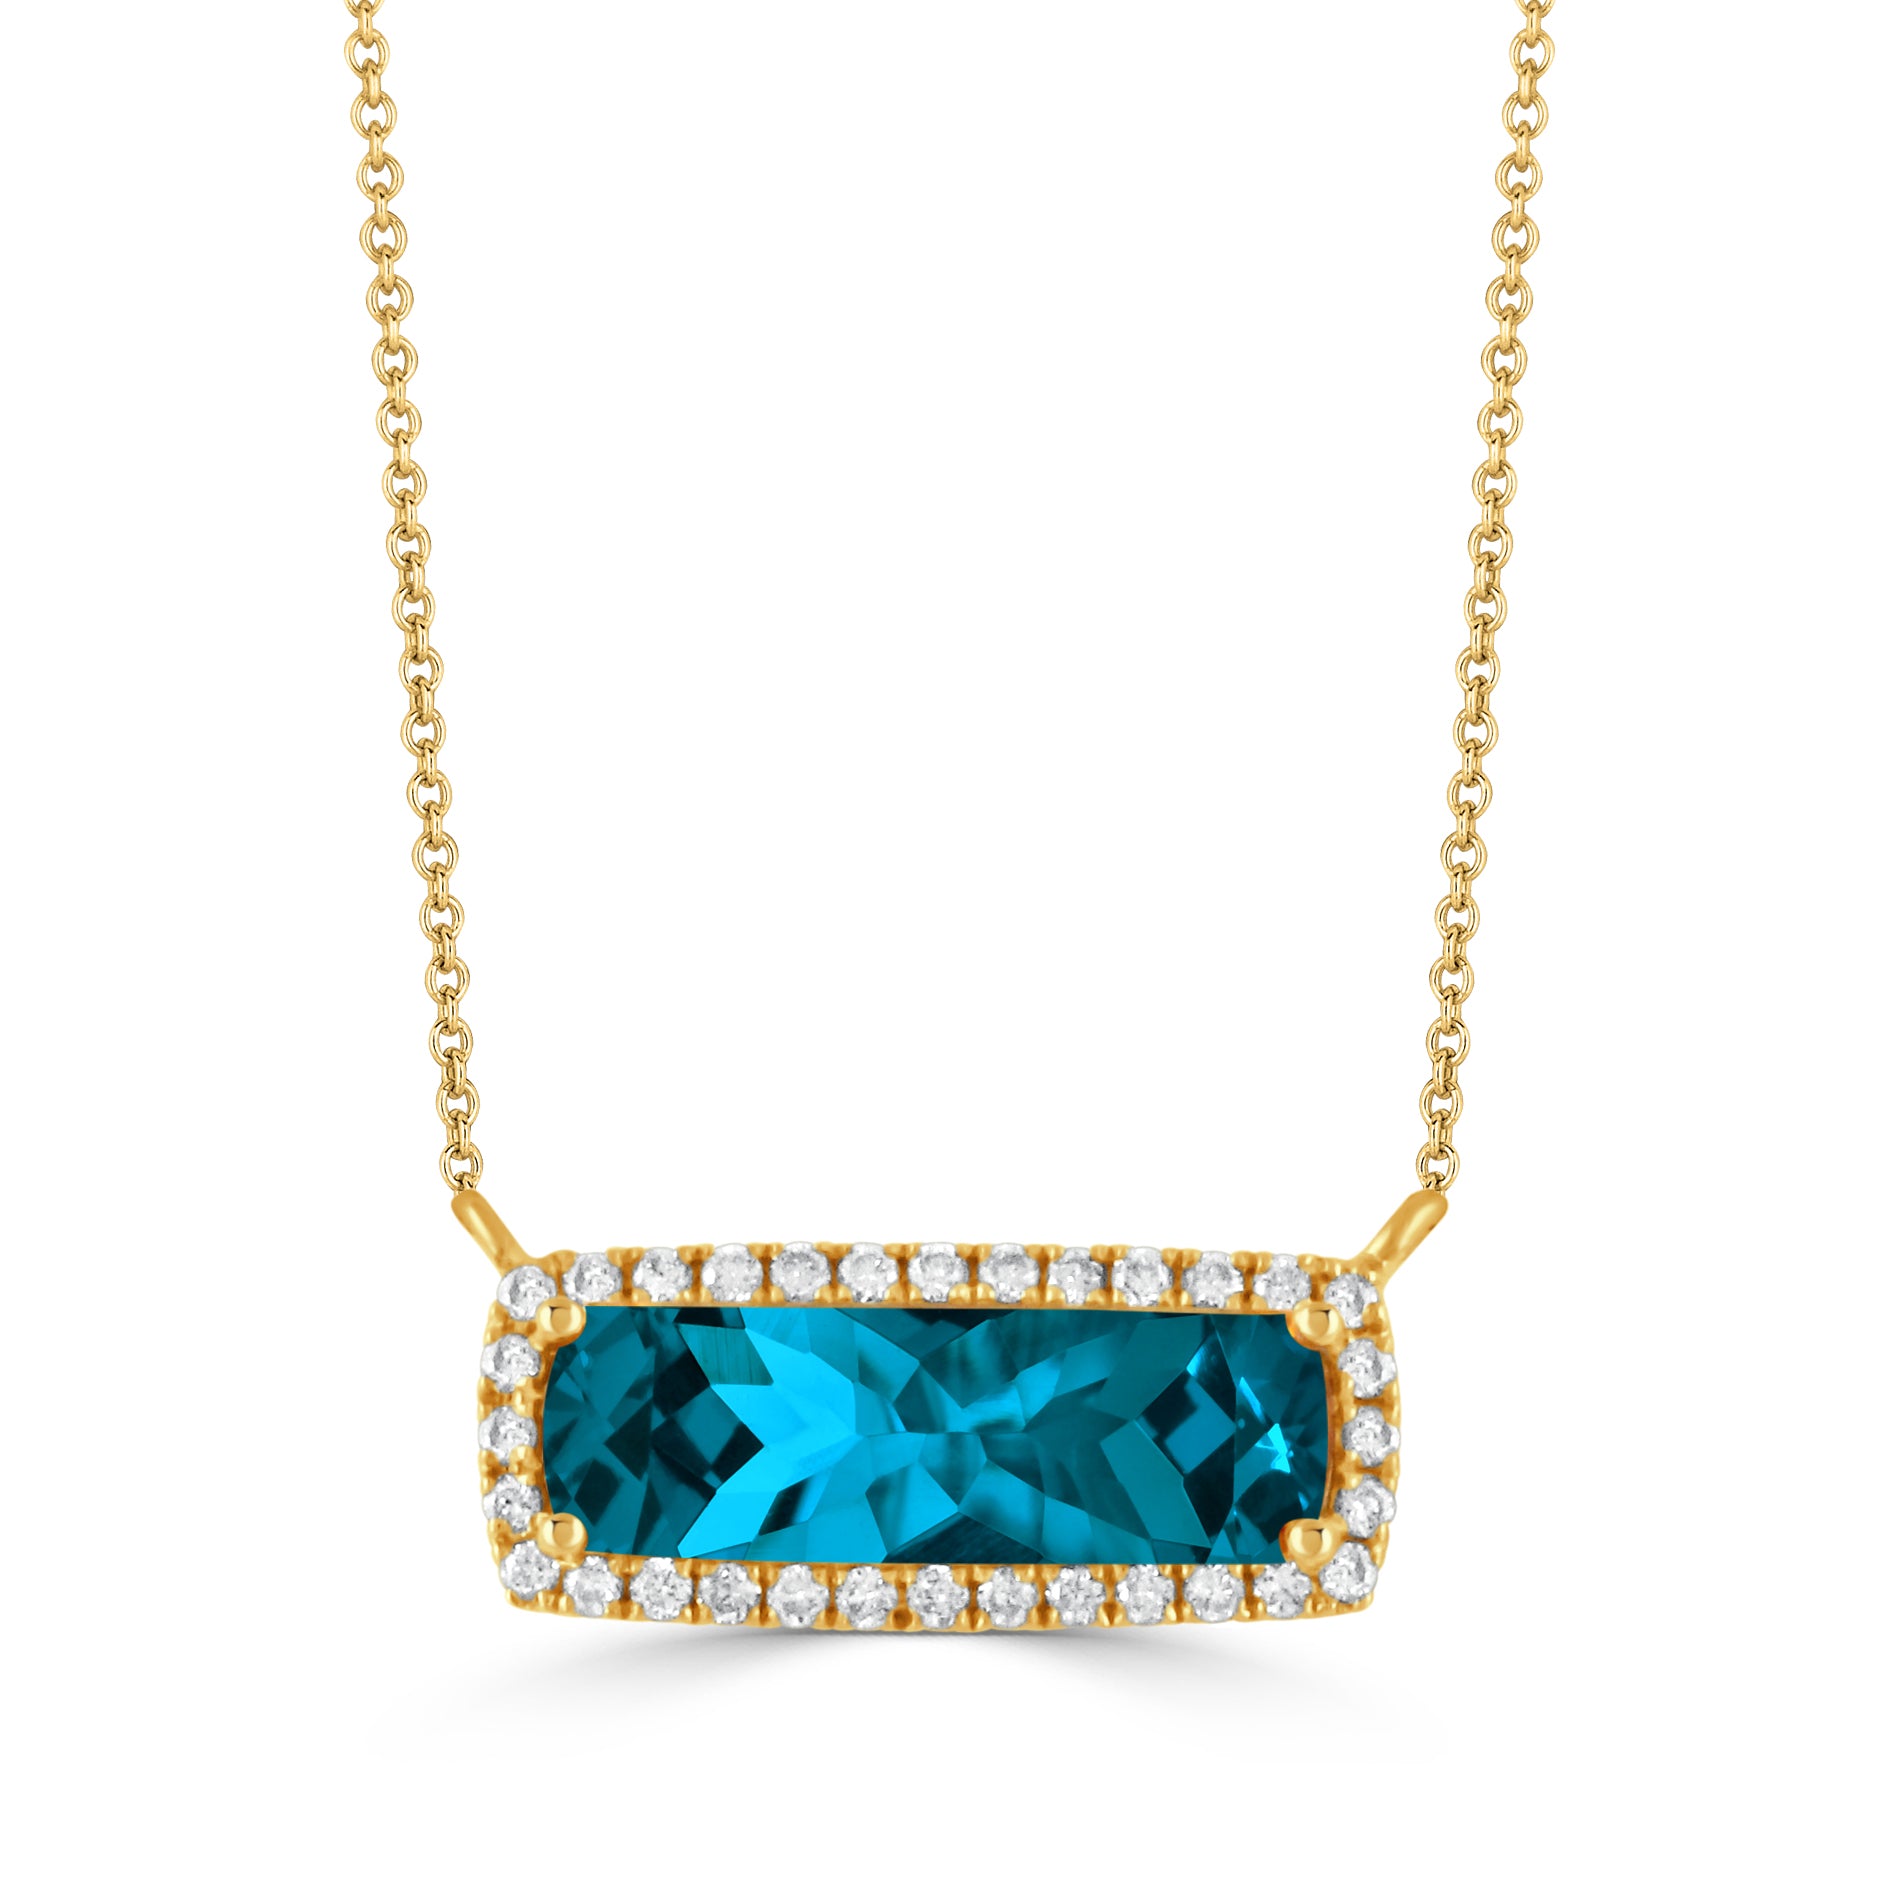 18K YELLOW GOLD DIAMOND NECKLACE WITH LONDON BLUE TOPAZ CENTER